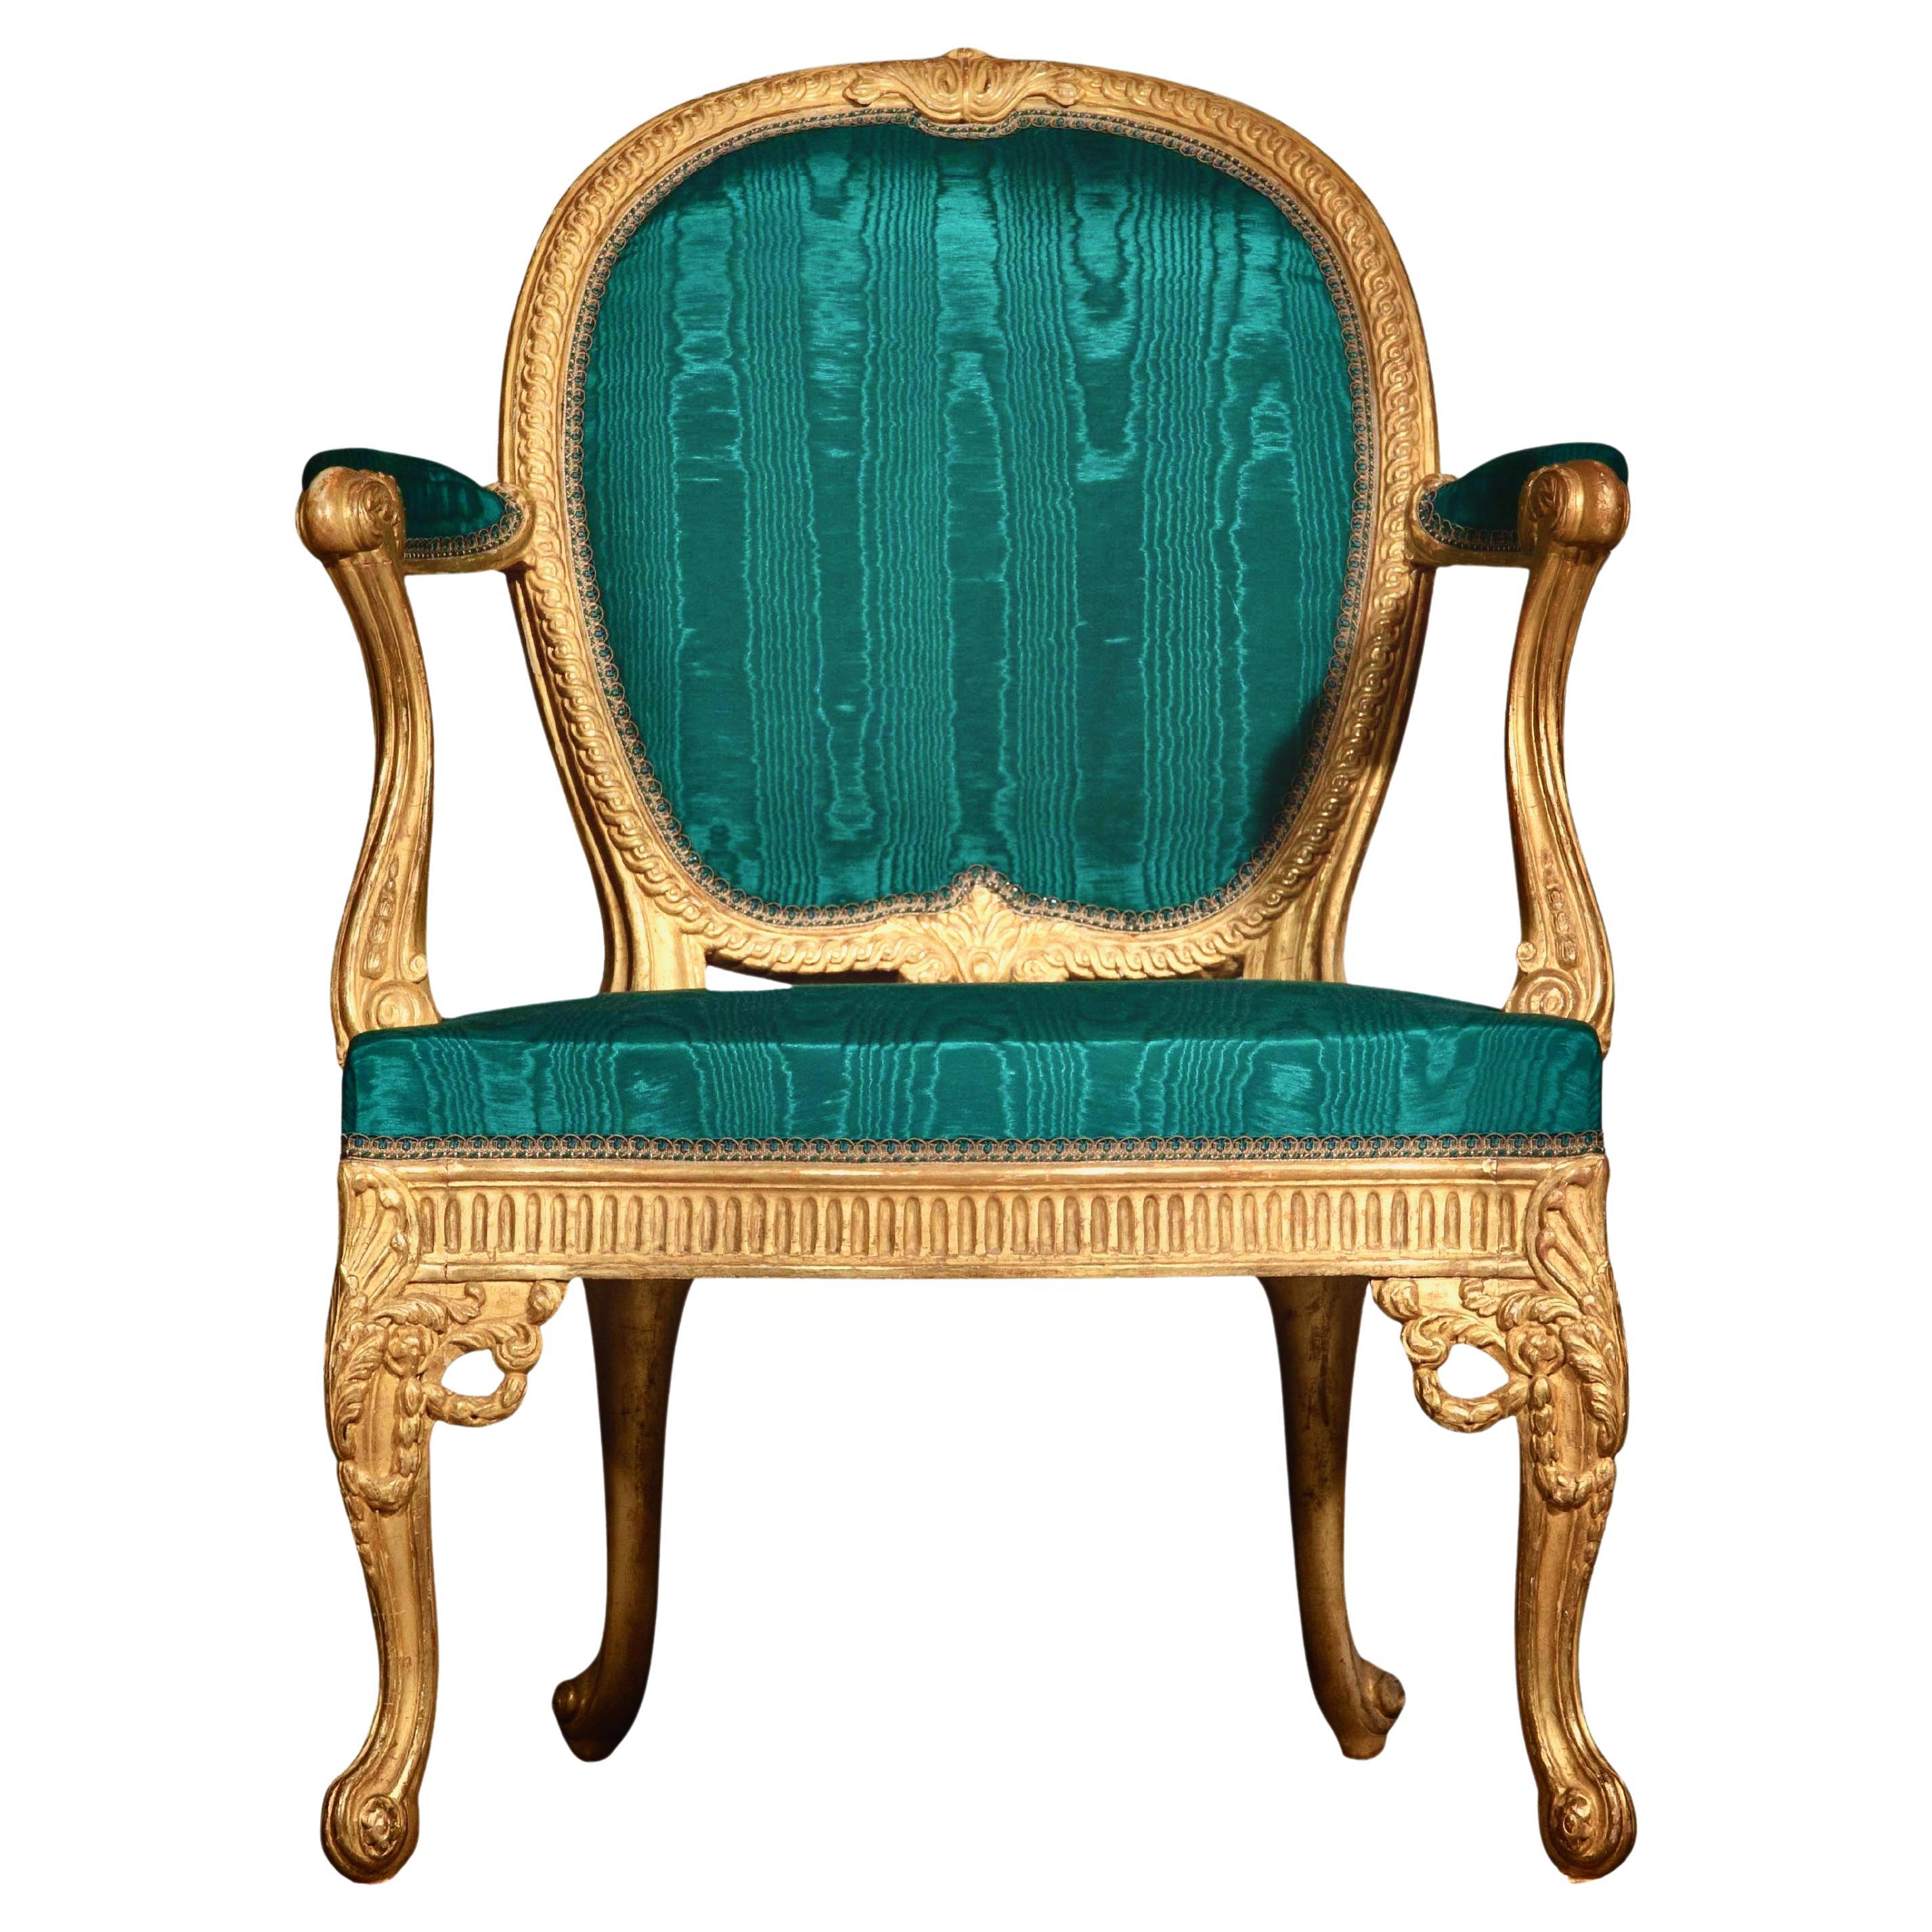 Gilt Armchair after Thomas Chippendale - Two Available